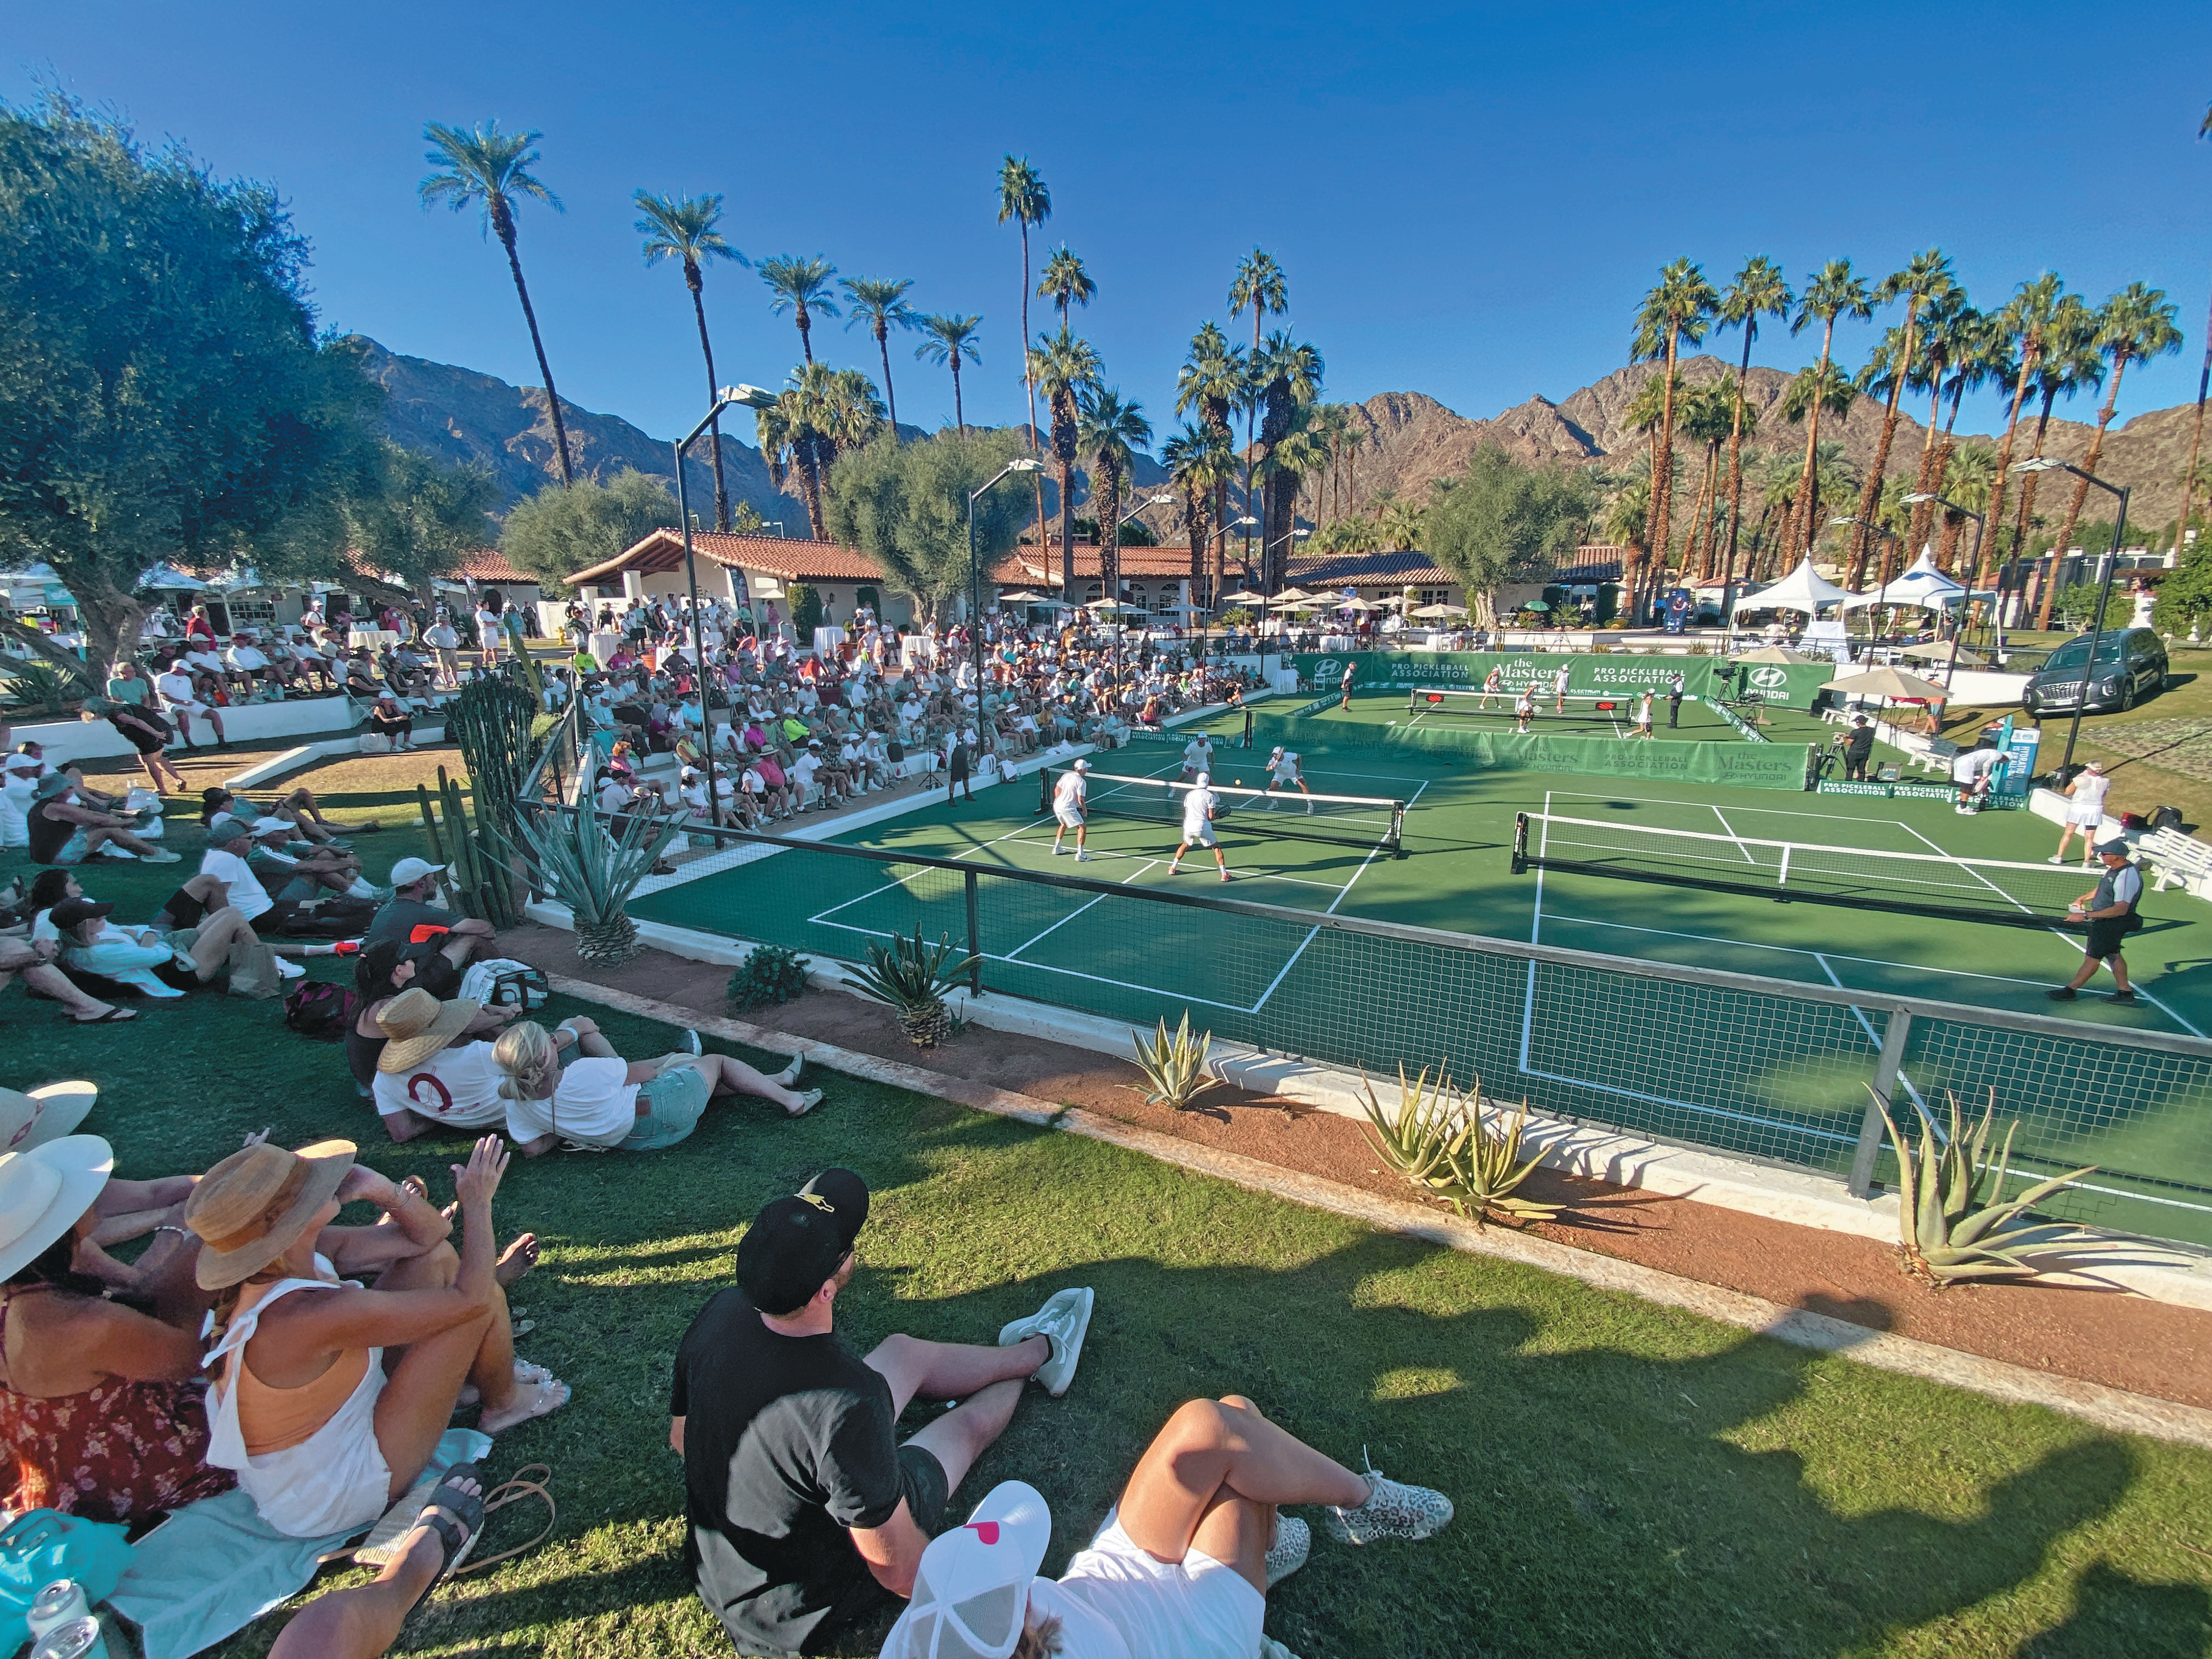 A trip through California's courts reveals plenty about pickleball's  inviting and intoxicating culture